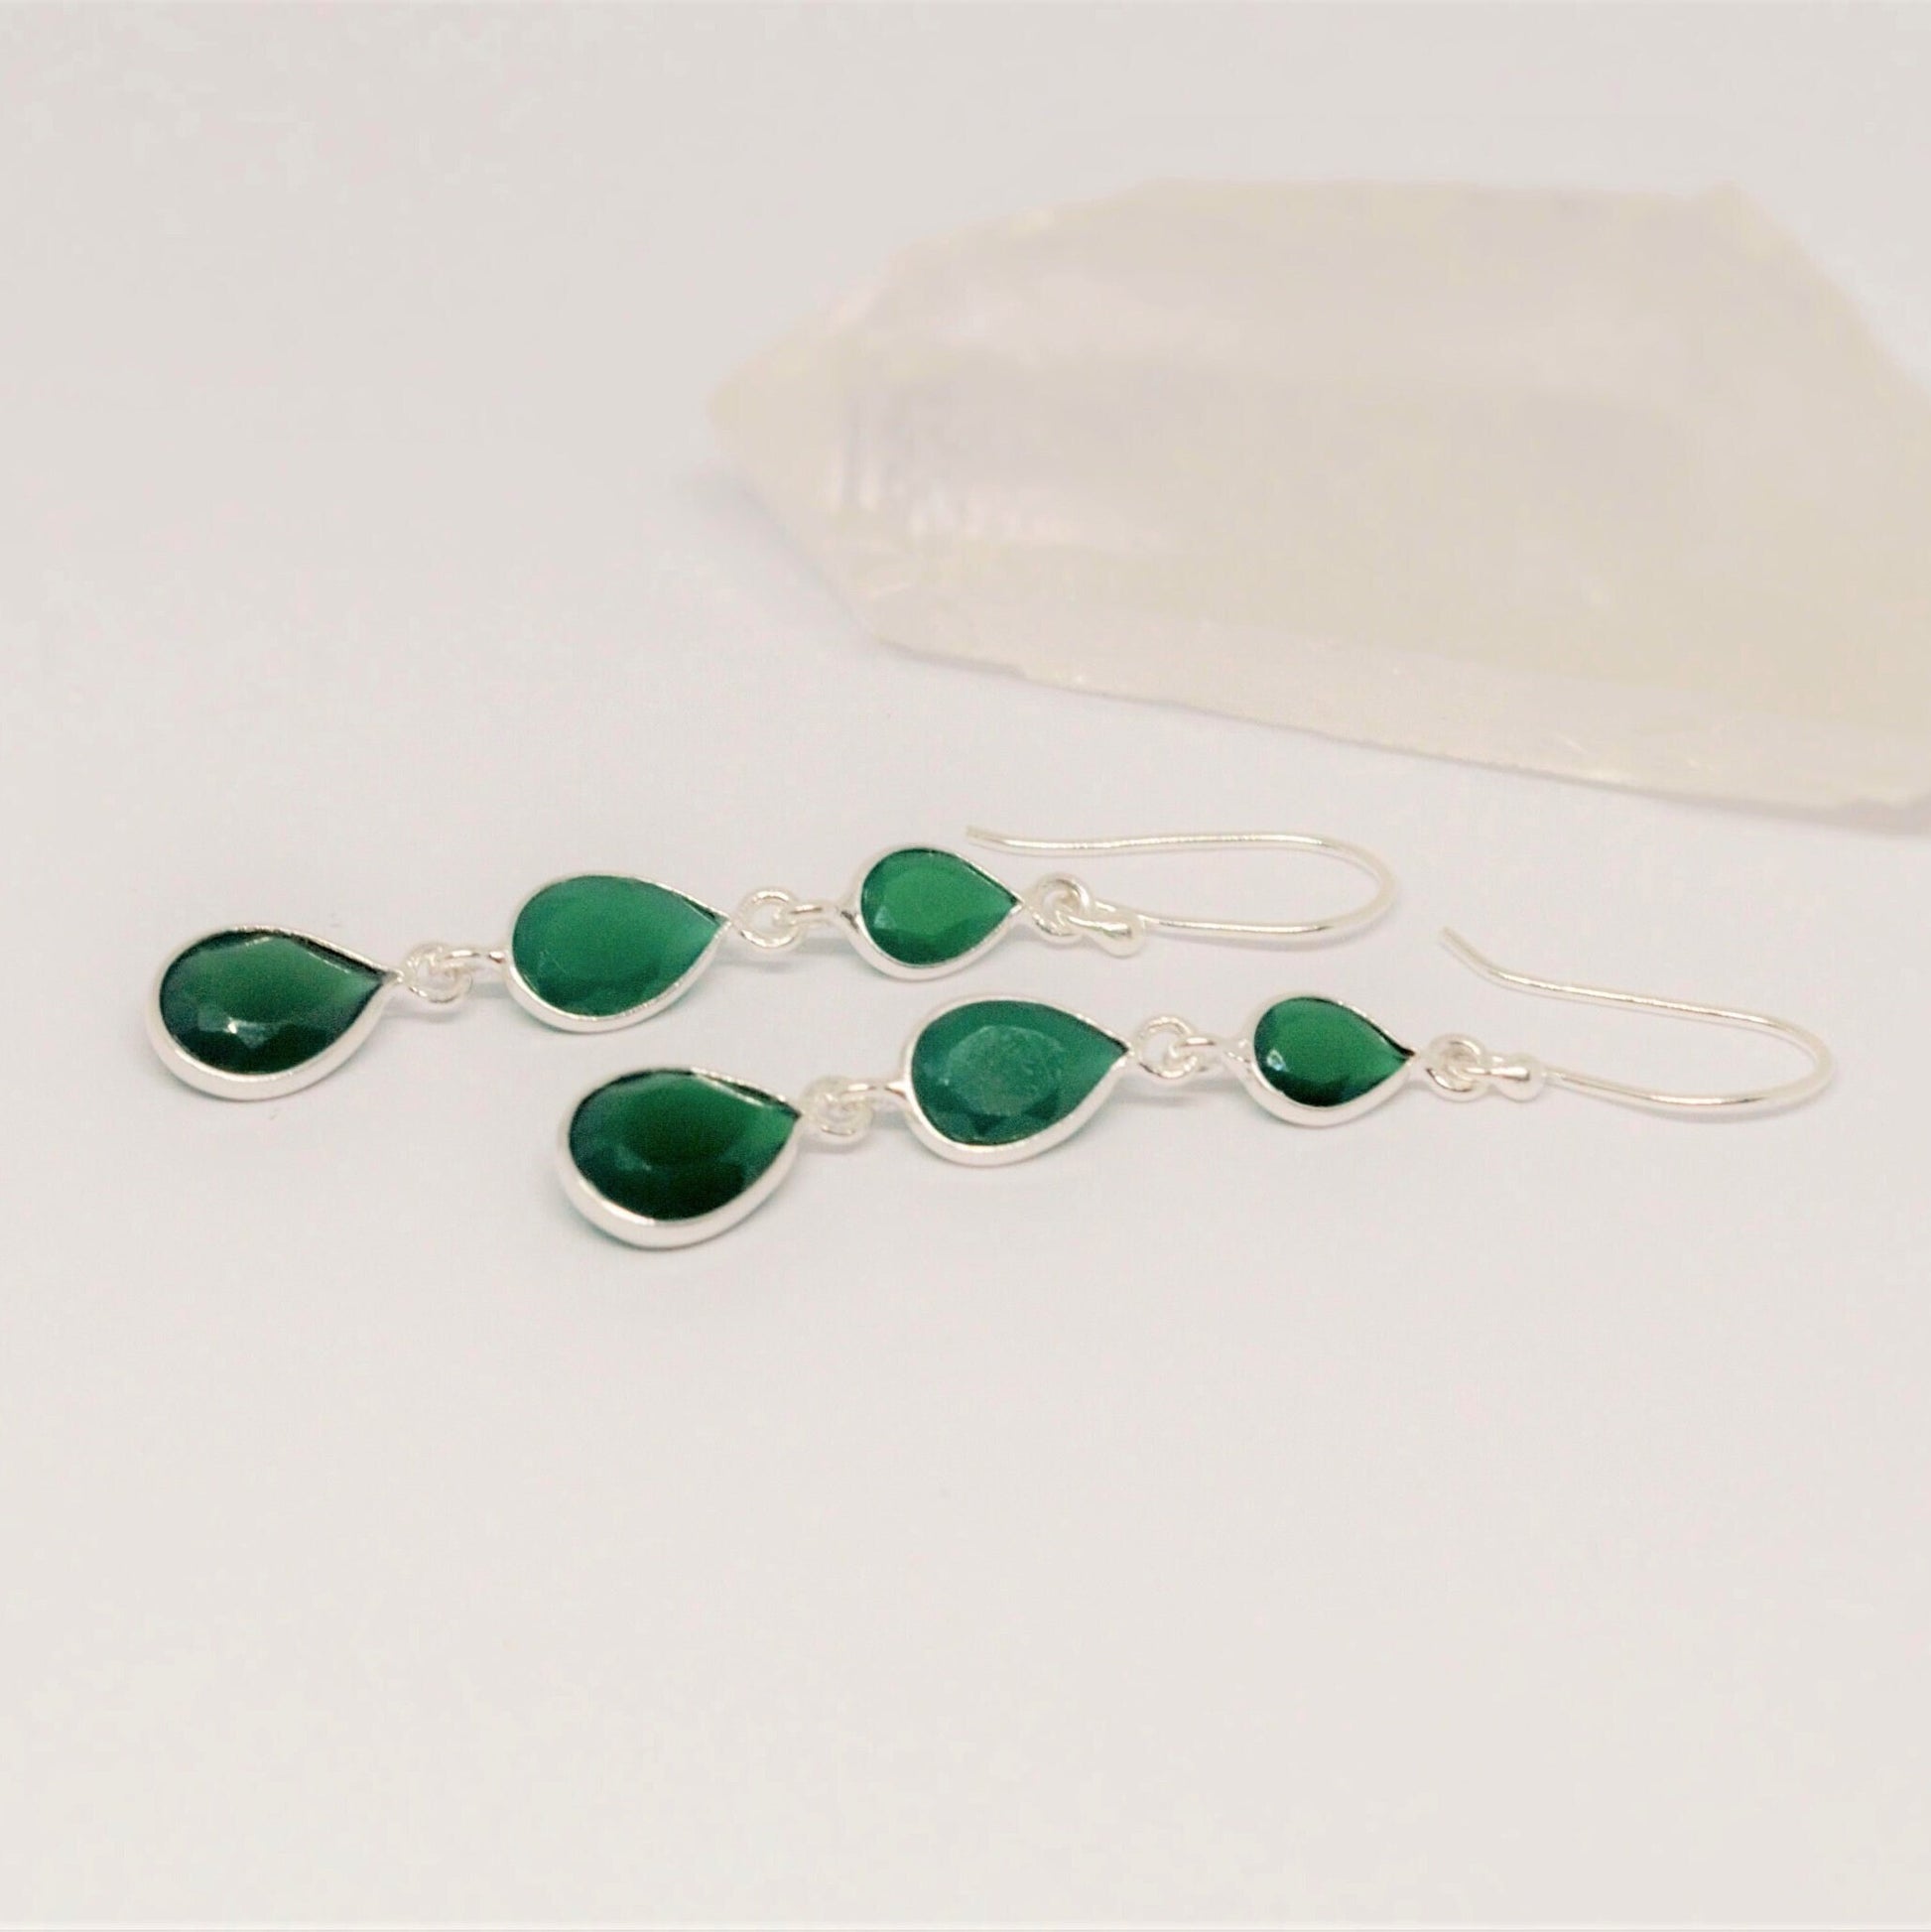 Green Onyx Sterling Silver Drop Earrings, Green Gemstone Dangle Earrings, Unique Statement Earrings, Bridesmaid Gift, Birthday Gifts For Her